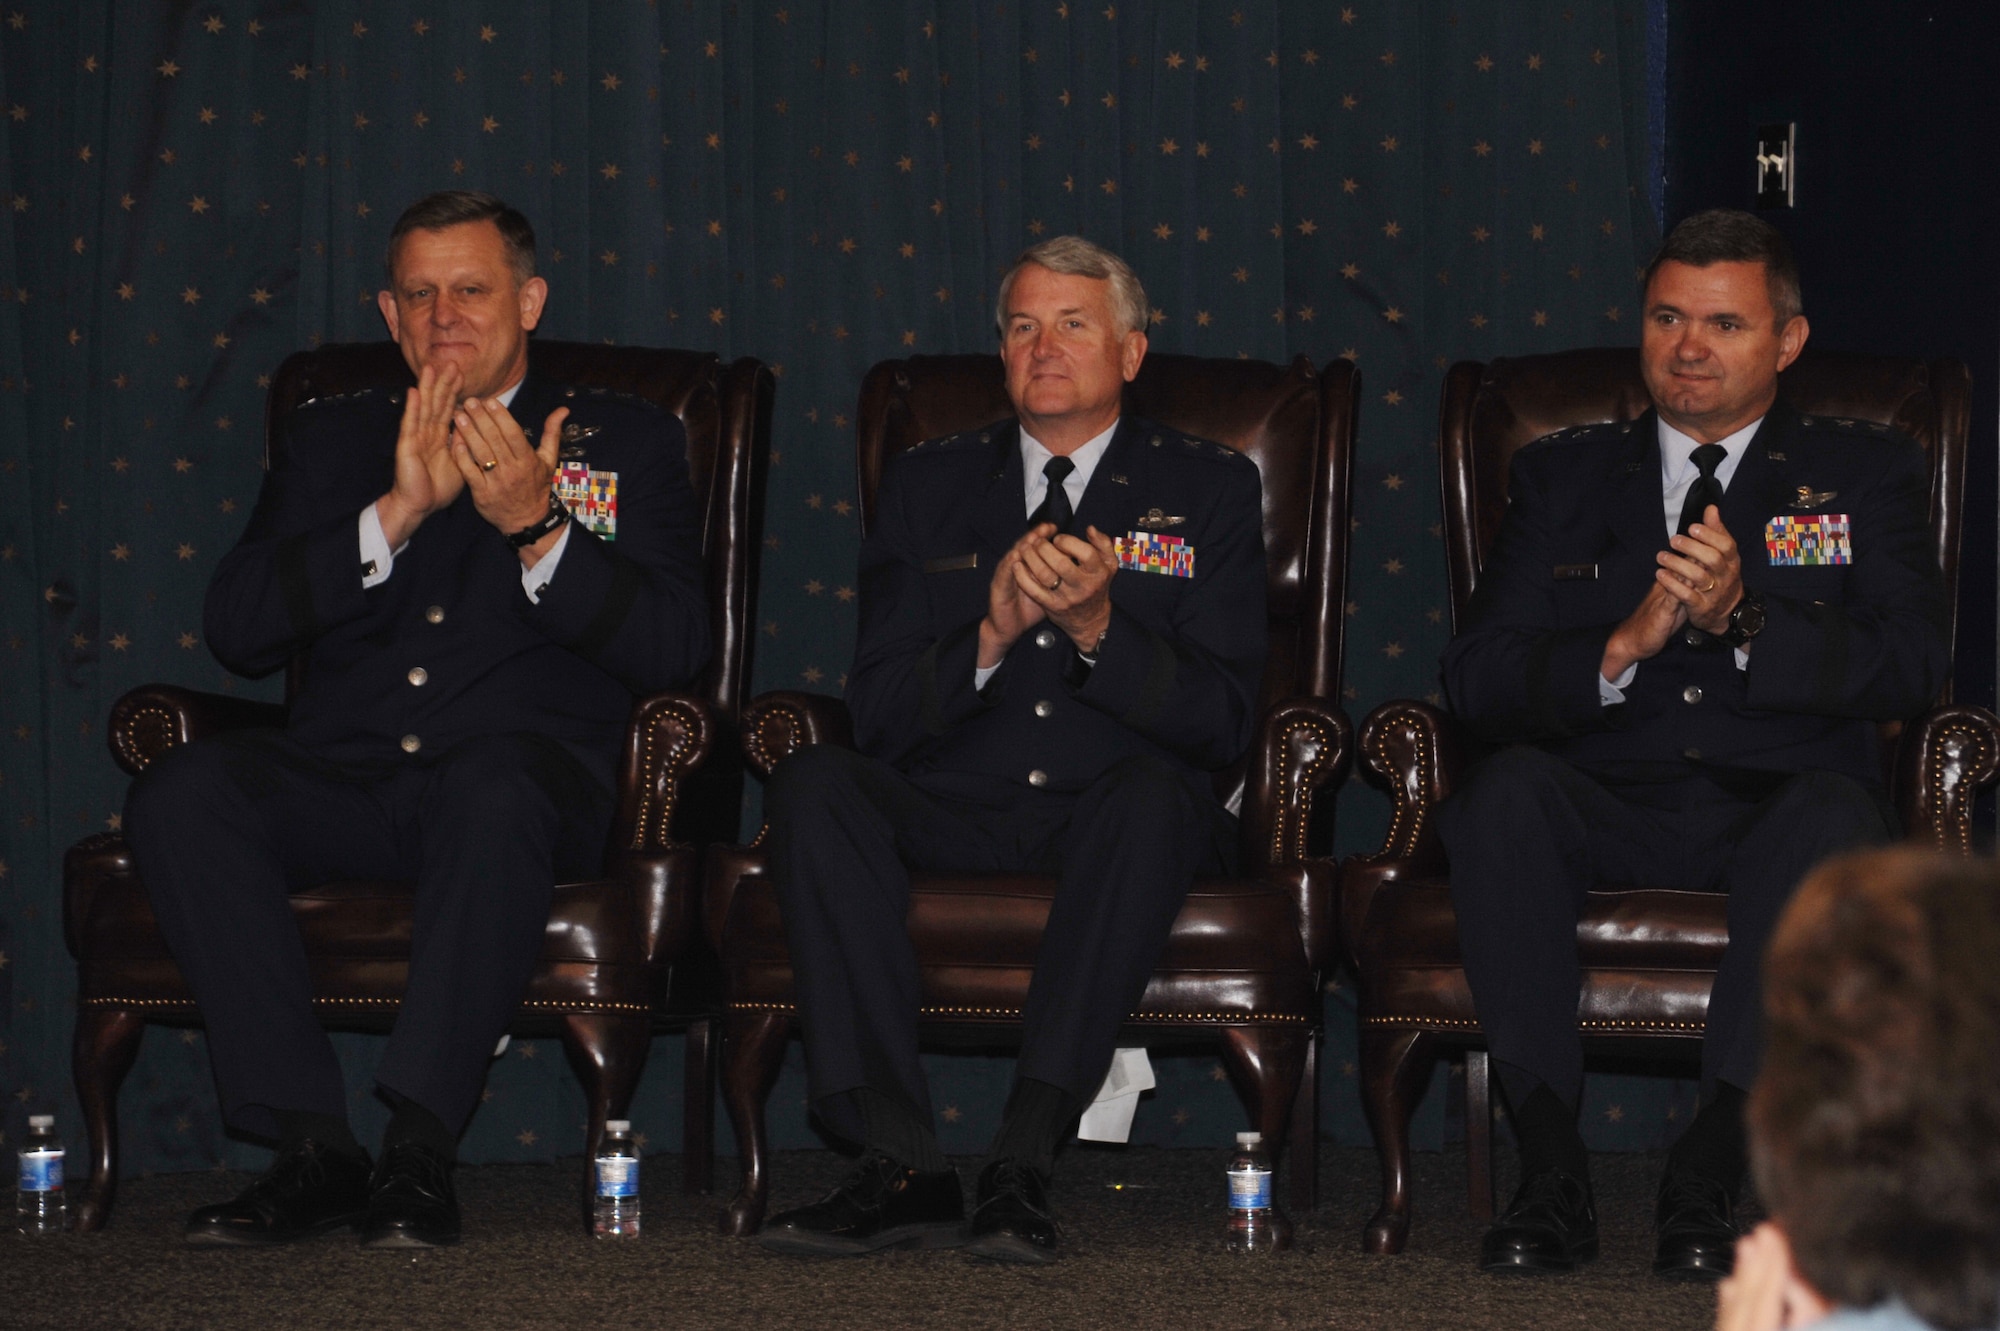 From the left: Assistant Vice Chief of Staff of the Air Force Lt. Gen. Frank Gorenc, departing Air Force Operational Test and Evaluation Center Commander Maj. Gen. David J. Eichhorn, and the incoming AFOTEC Commander Maj. Gen. Scott D. West welcome guests to the Sept. 13 change of command. (U.S. Air Force photo/Ken C. Moore)